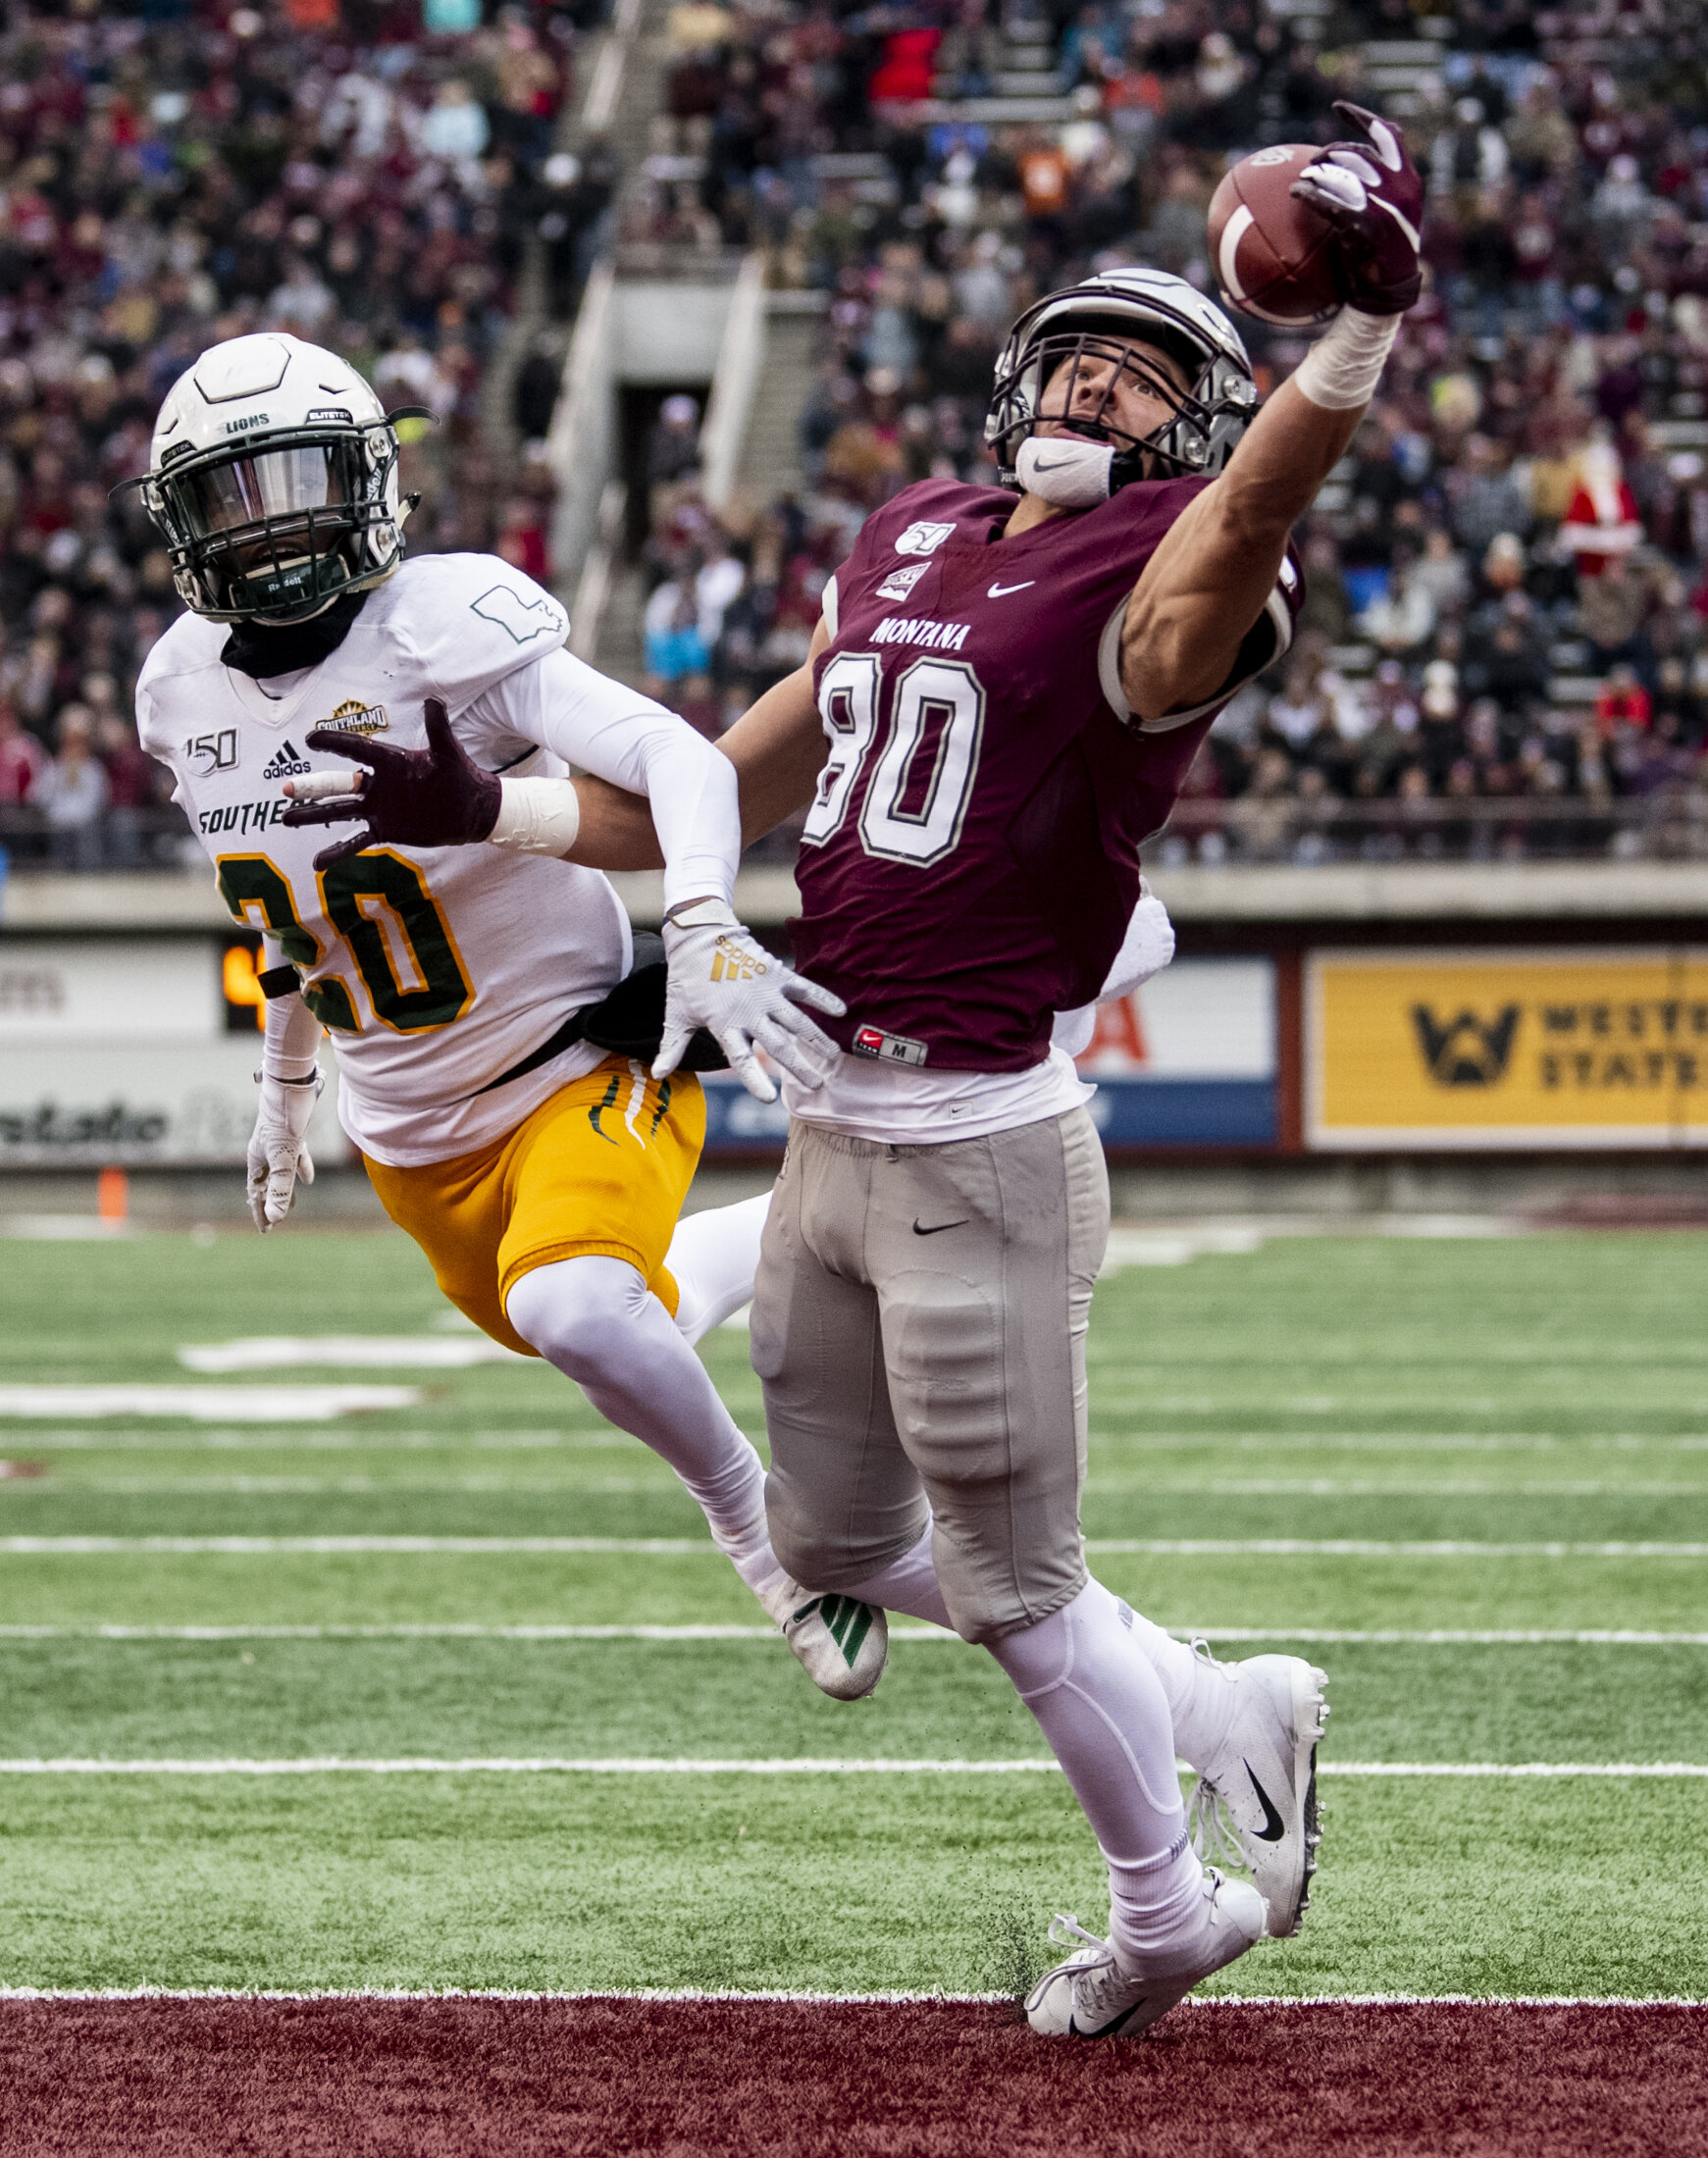  Montana's Mitch Roberts (80) tries to a catch a pass in the end zone ahead of Southeastern Louisiana's Dontrell Smith (20) during their game at Washington-Grizzly Stadium, Dec. 7, 2019 in Missoula, Mont. 